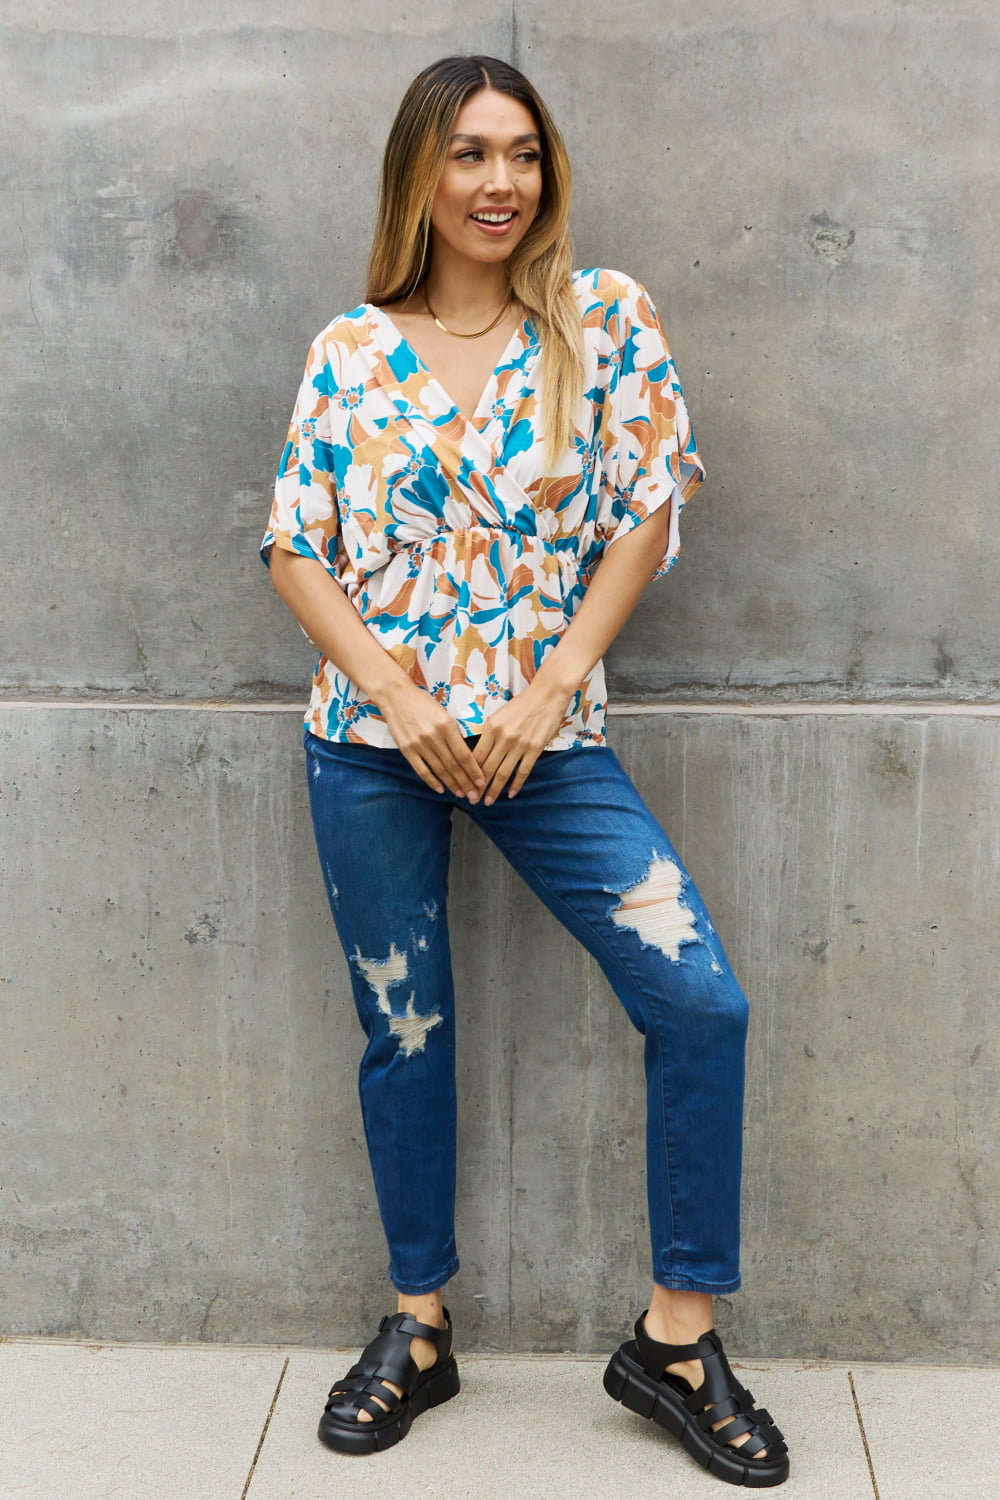 BOMBOM Floral Print Wrap Tunic Top - Coco and lulu boutique 